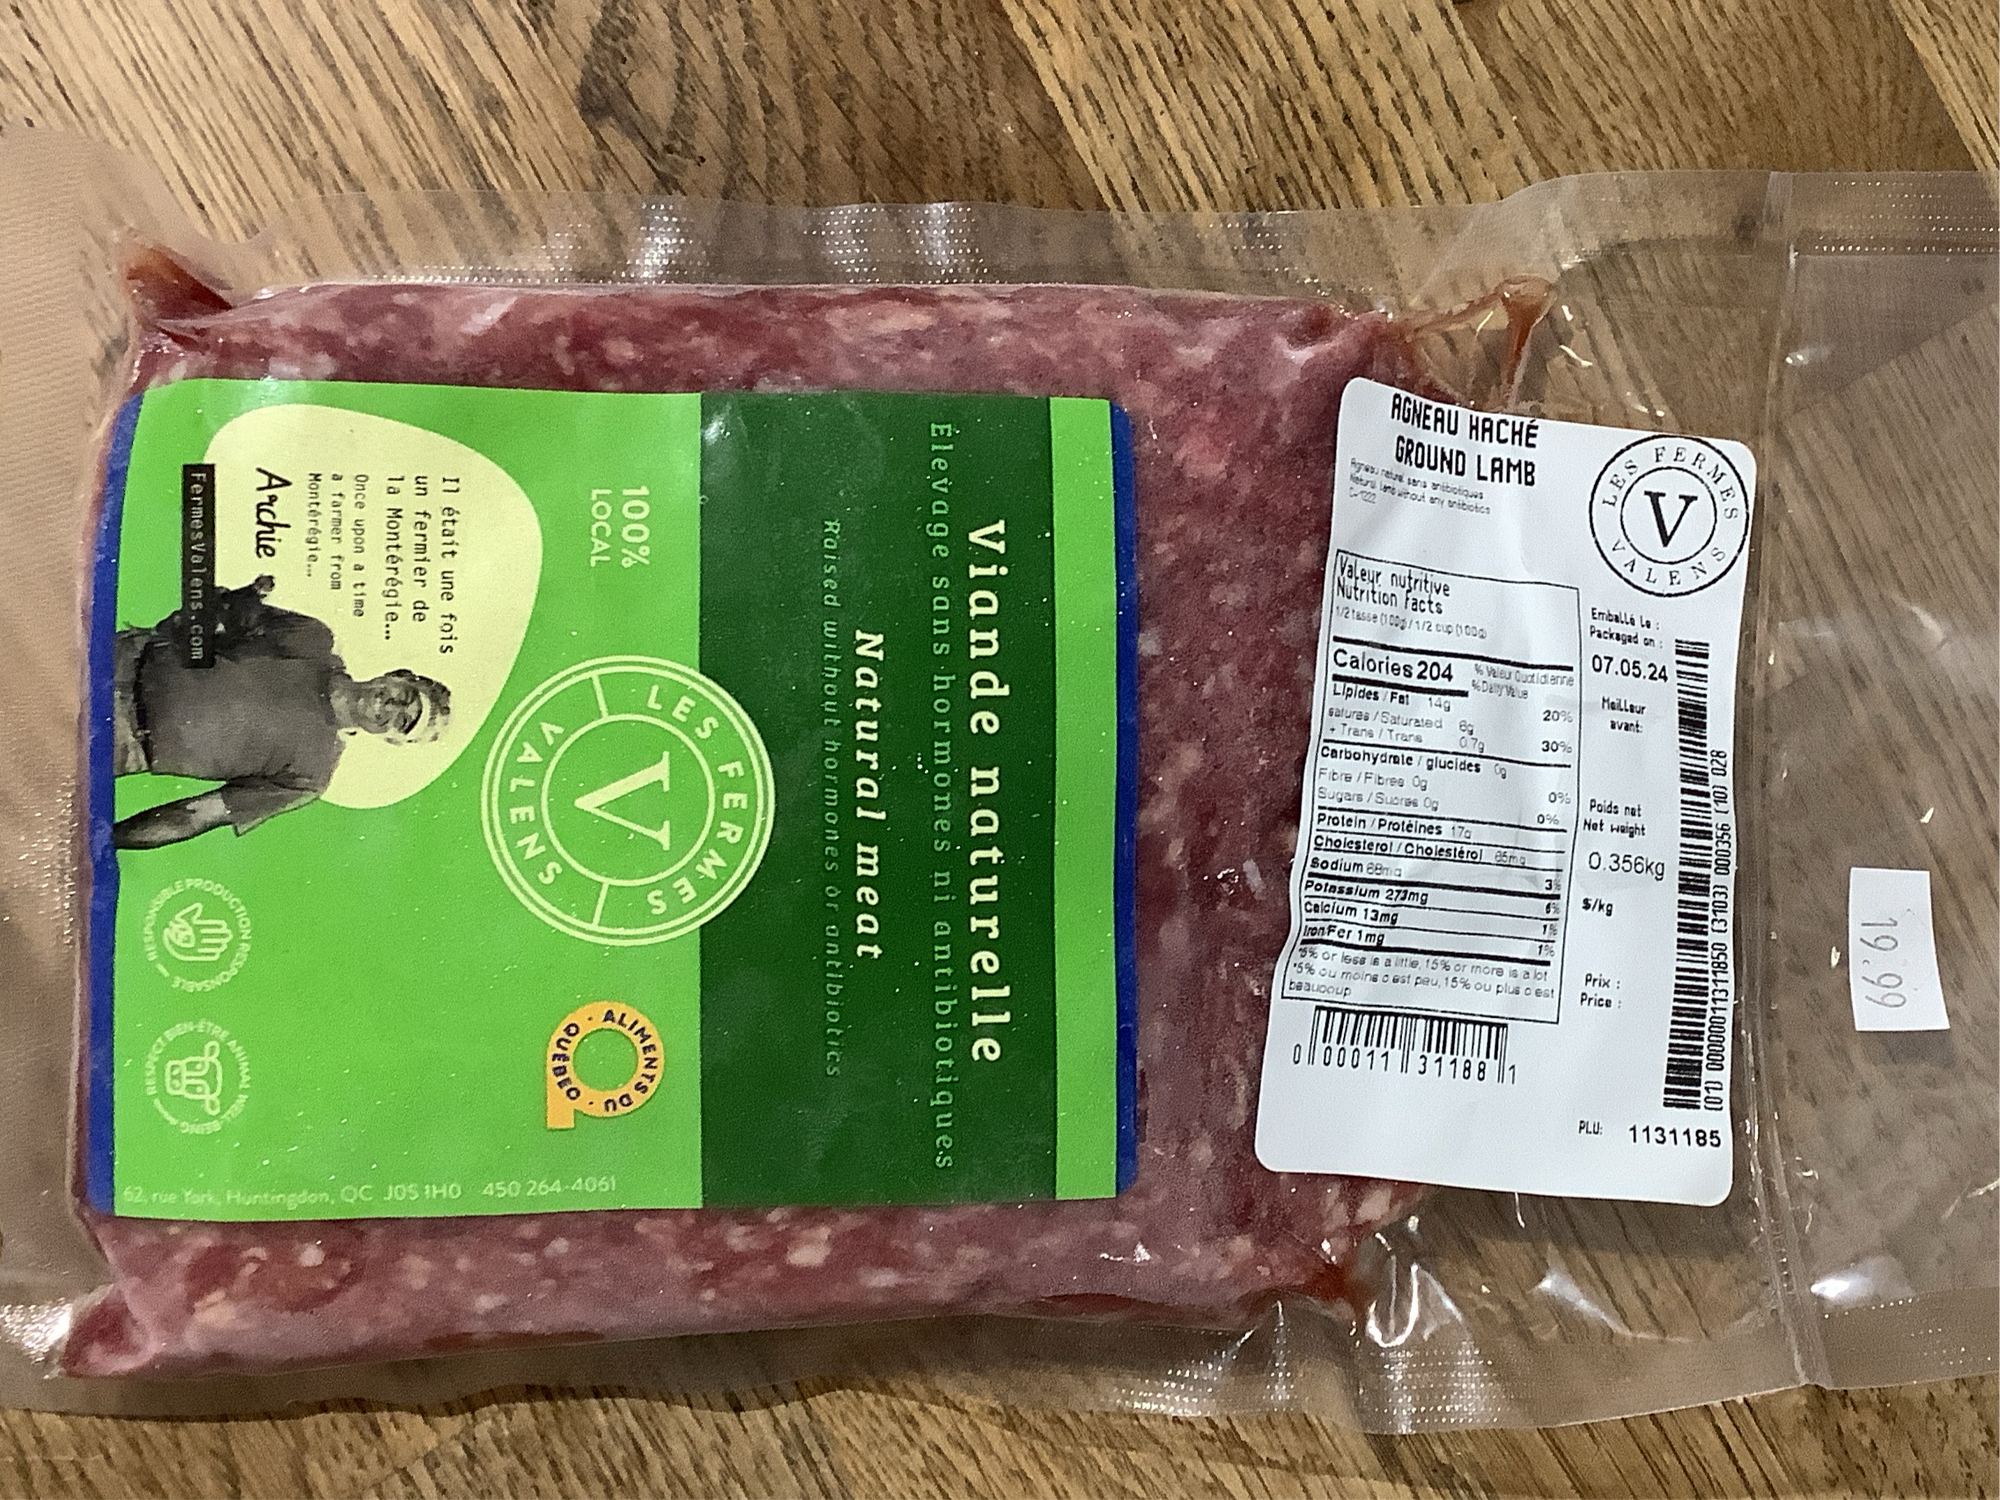 Natural Ground Lamb by Les Fermes Valens